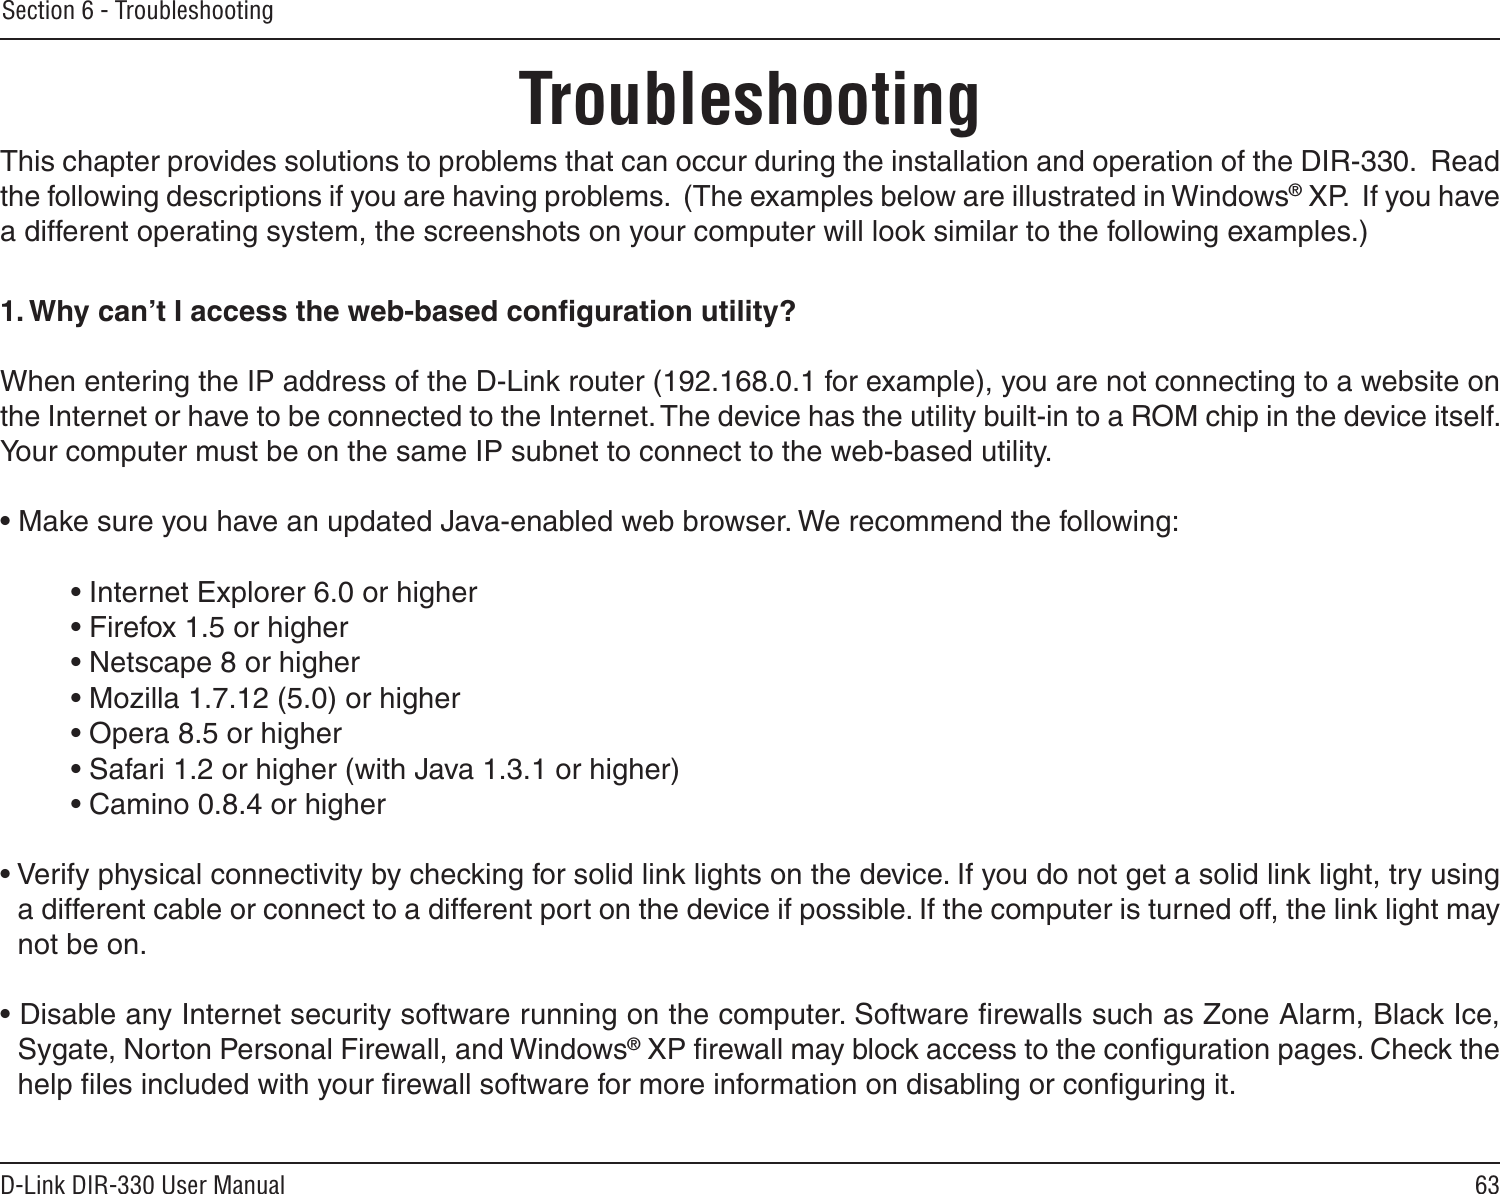 63D-Link DIR-330 User ManualSection 6 - TroubleshootingTroubleshootingThis chapter provides solutions to problems that can occur during the installation and operation of the DIR-330.  Read the following descriptions if you are having problems.  (The examples below are illustrated in Windows® XP.  If you have a different operating system, the screenshots on your computer will look similar to the following examples.)1. Why can’t I access the web-based conﬁguration utility?When entering the IP address of the D-Link router (192.168.0.1 for example), you are not connecting to a website on the Internet or have to be connected to the Internet. The device has the utility built-in to a ROM chip in the device itself. Your computer must be on the same IP subnet to connect to the web-based utility. • Make sure you have an updated Java-enabled web browser. We recommend the following: • Internet Explorer 6.0 or higher • Firefox 1.5 or higher• Netscape 8 or higher • Mozilla 1.7.12 (5.0) or higher • Opera 8.5 or higher • Safari 1.2 or higher (with Java 1.3.1 or higher) • Camino 0.8.4 or higher • Verify physical connectivity by checking for solid link lights on the device. If you do not get a solid link light, try using a different cable or connect to a different port on the device if possible. If the computer is turned off, the link light may not be on.• Disable any Internet security software running on the computer. Software ﬁrewalls such as Zone Alarm, Black Ice, Sygate, Norton Personal Firewall, and Windows® XP ﬁrewall may block access to the conﬁguration pages. Check the help ﬁles included with your ﬁrewall software for more information on disabling or conﬁguring it.